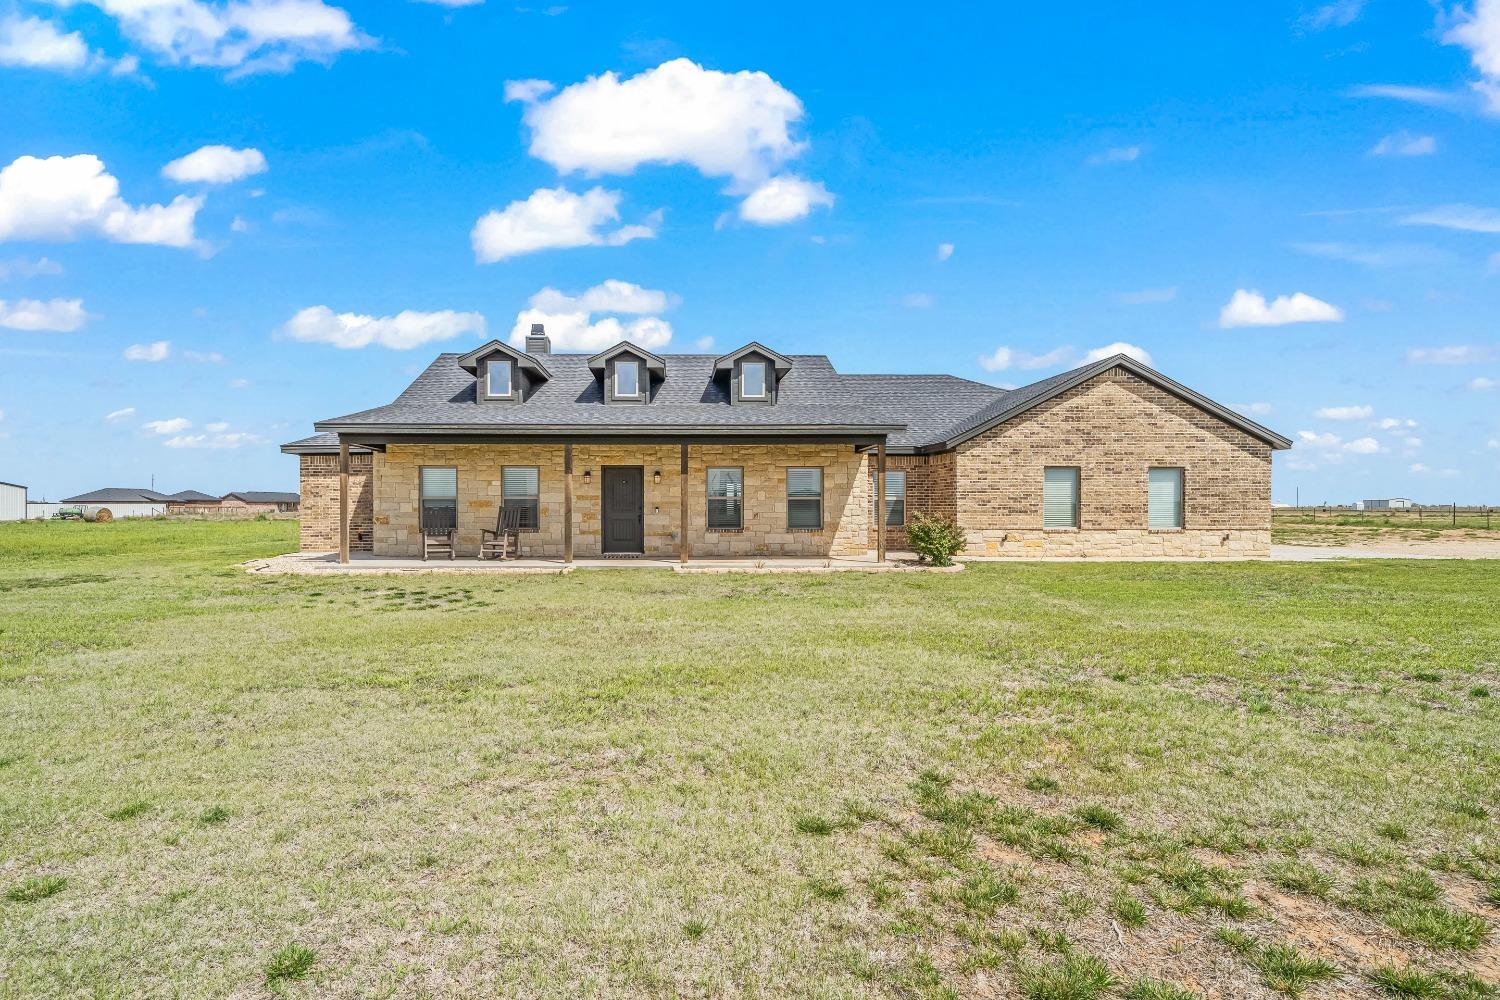 Welcome to your West Texas dream home located on 10 acres! Come take a look at this 3/2.5/2 with a large office and fenced acreage for horses. This home is sure to impress with its modern updates, 20X30 shop, and large back porch to enjoy west Texas evenings. Don't miss out on this move in ready home with all the updates.